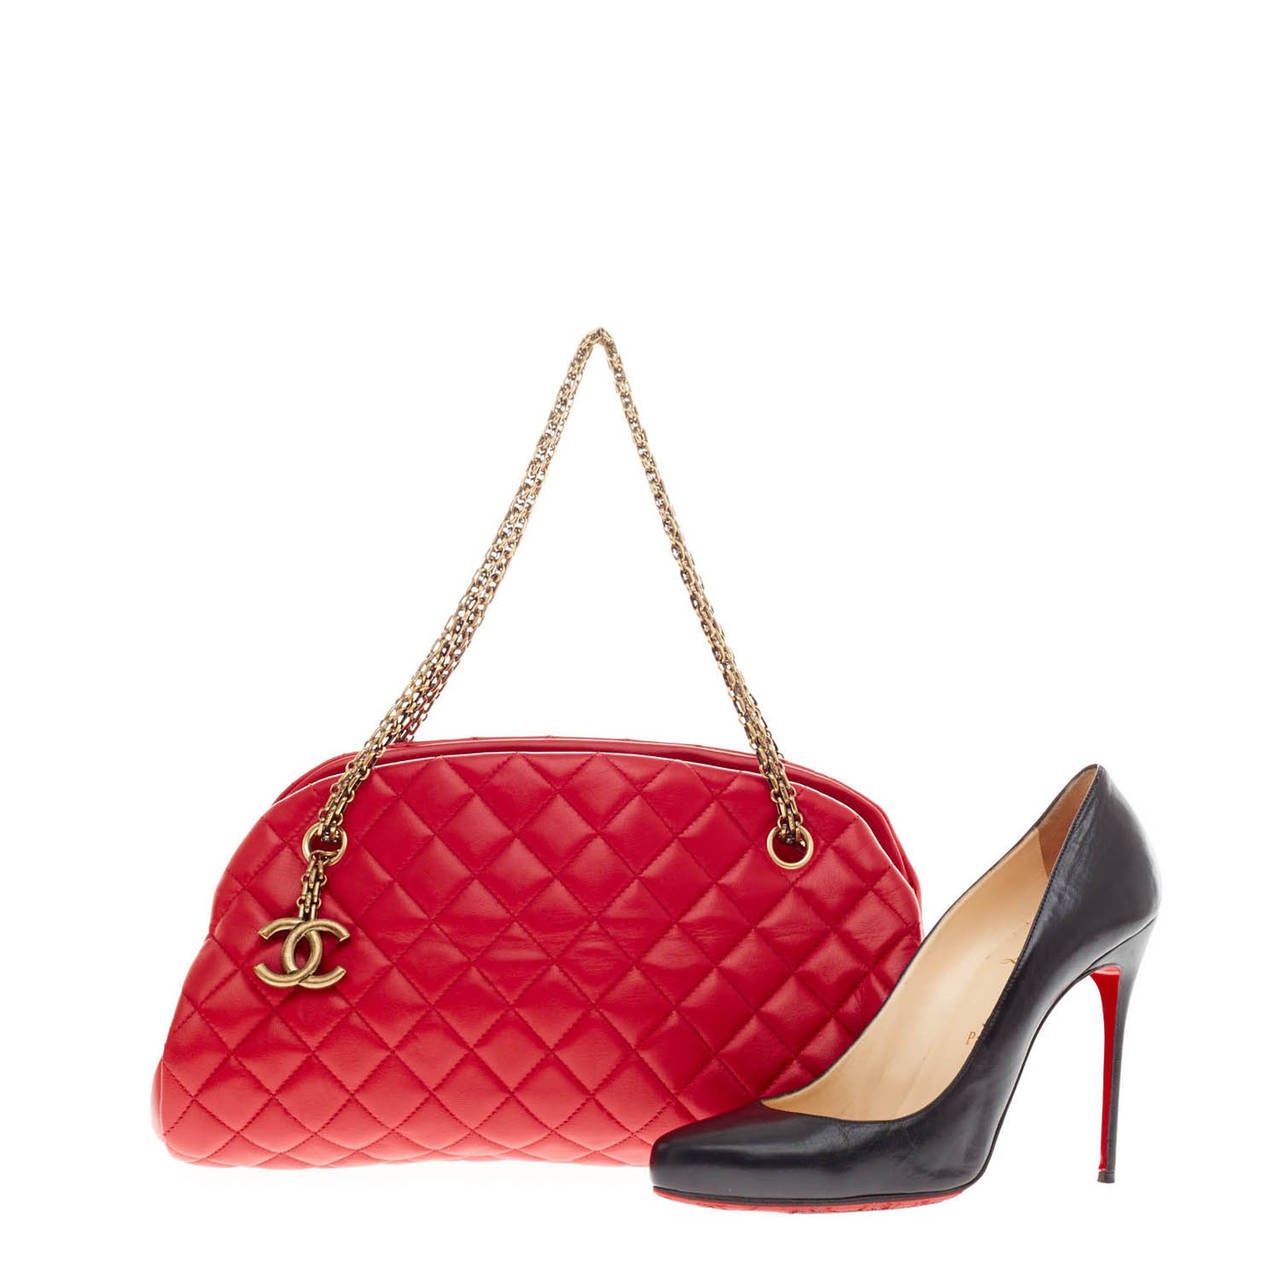 This authentic Chanel Just Mademoiselle Quilted Leather in Medium gives a chic pop of color that complements any look. Crafted from sumptuous red leather in Chanel's iconic diamond stitch pattern, this bag features brass-tone hardware, interlocking